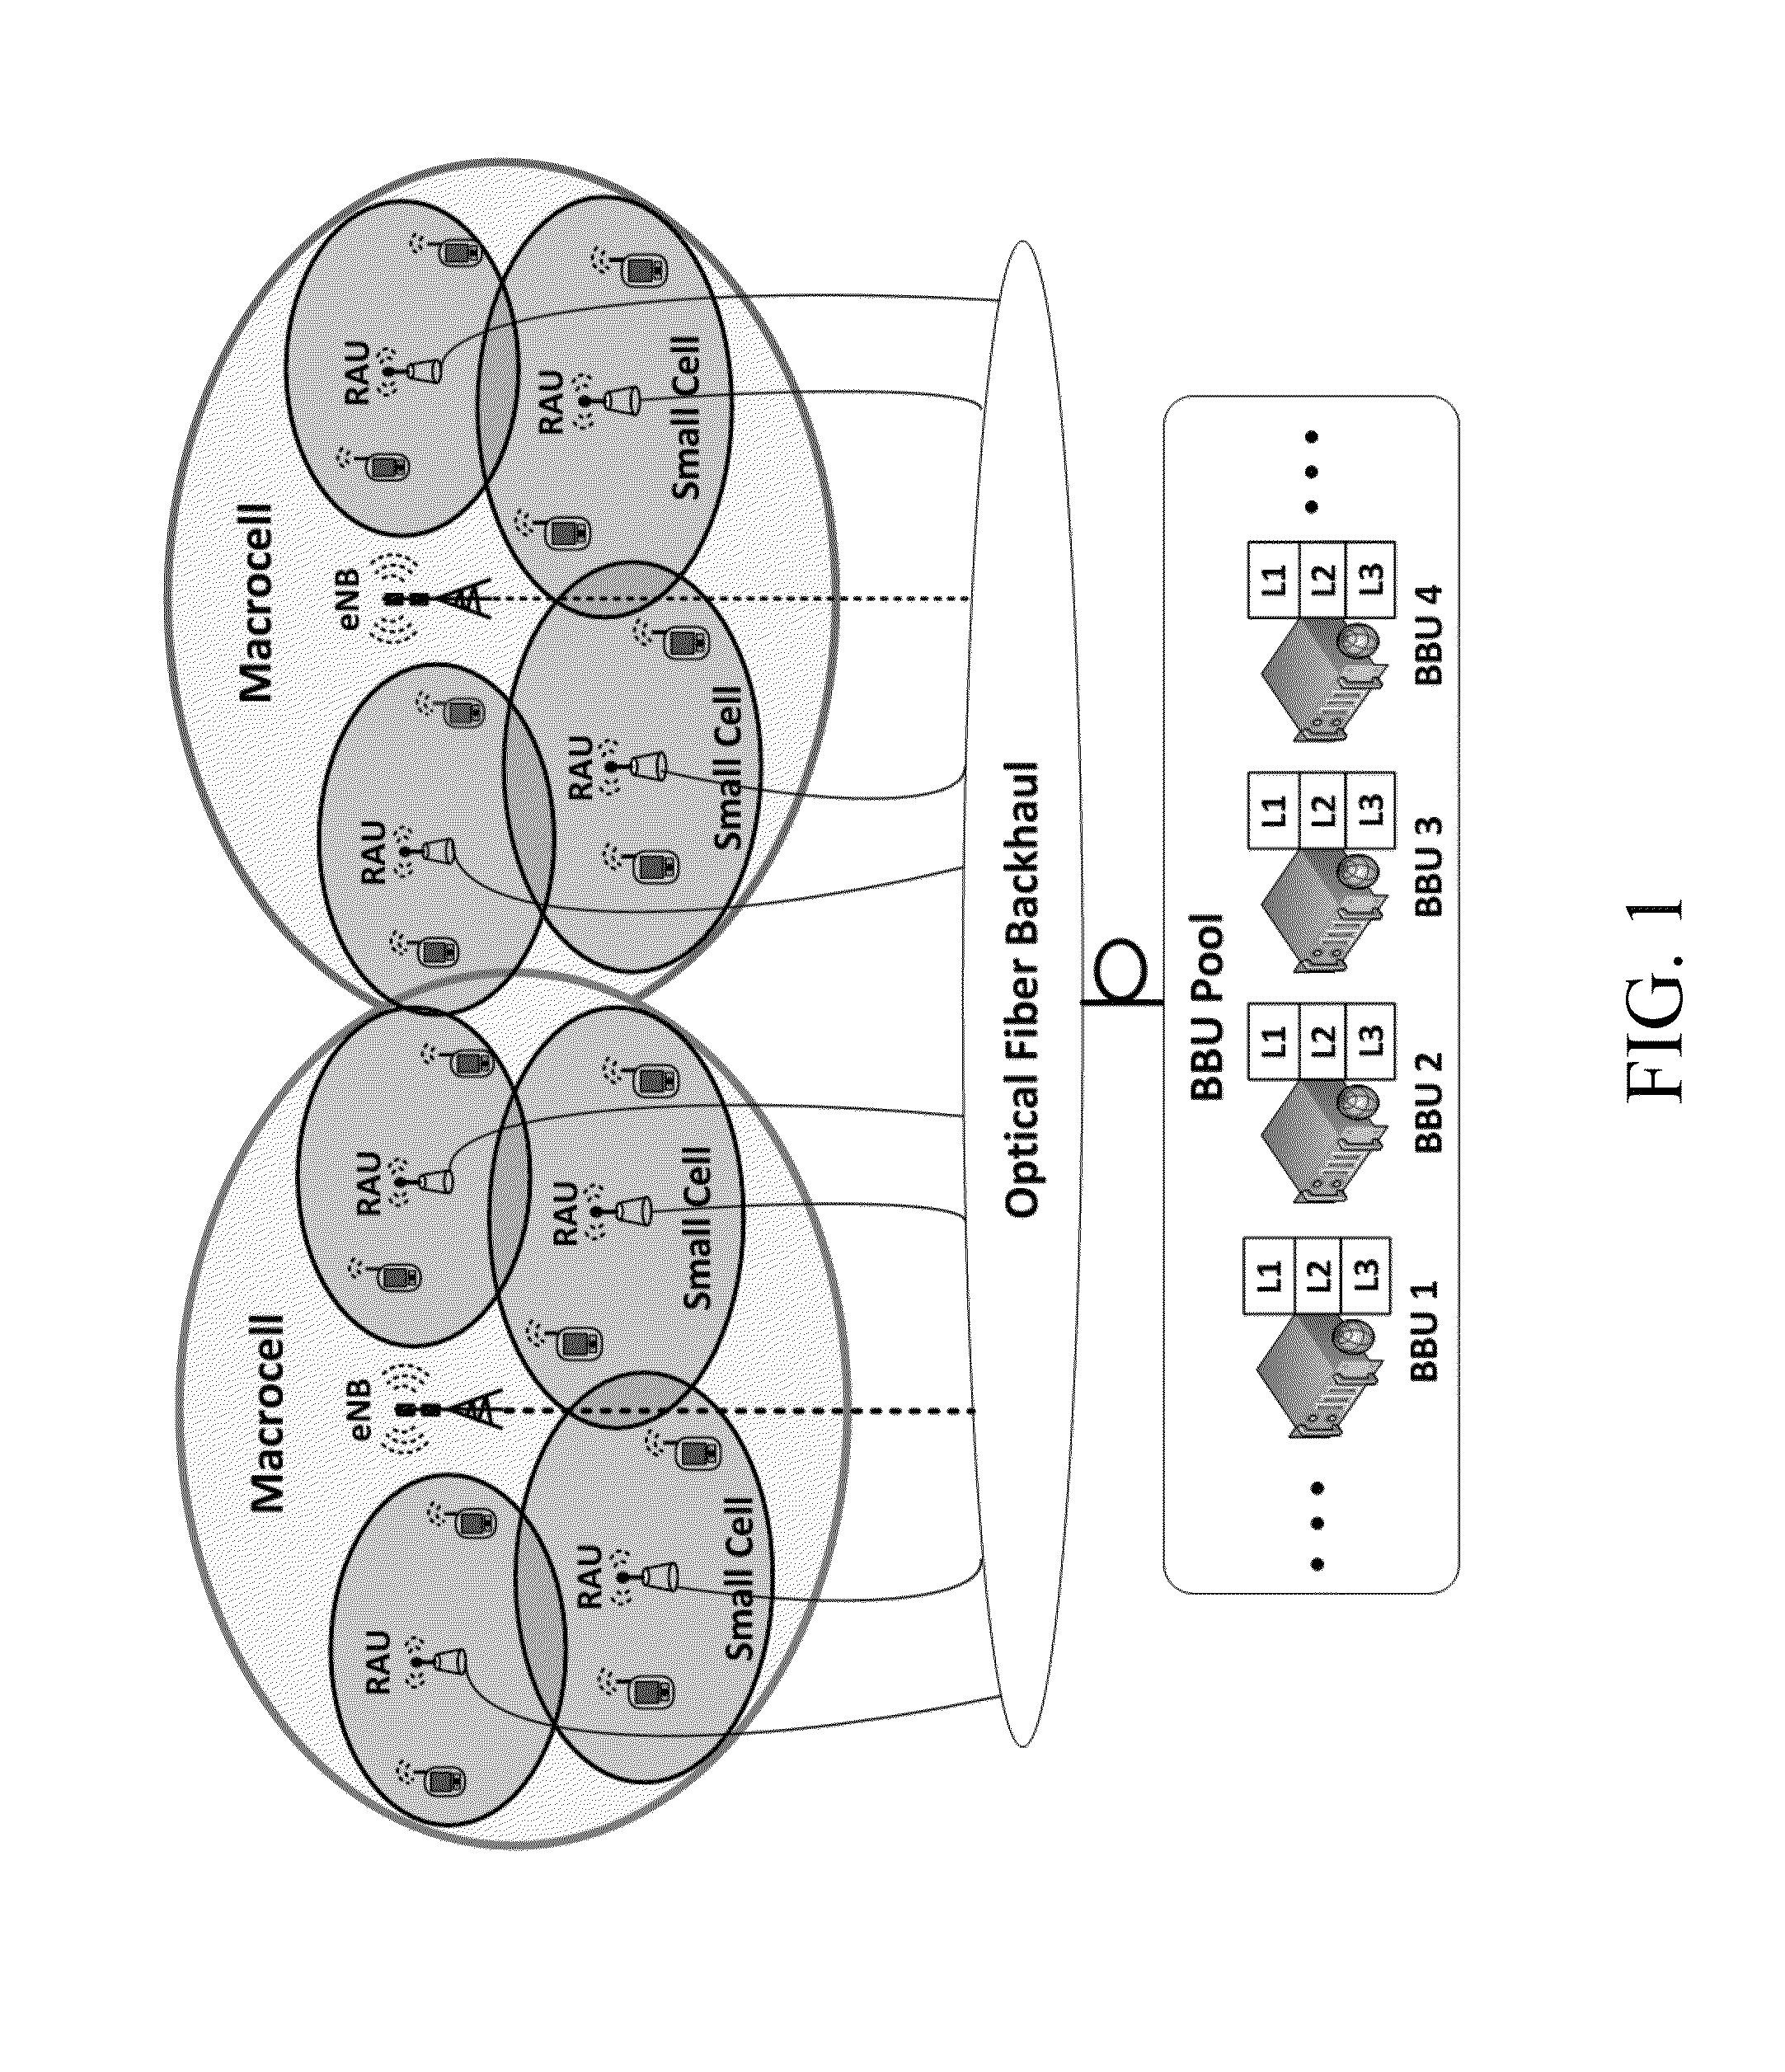 Cloud-based Radio Access Network for Small Cells